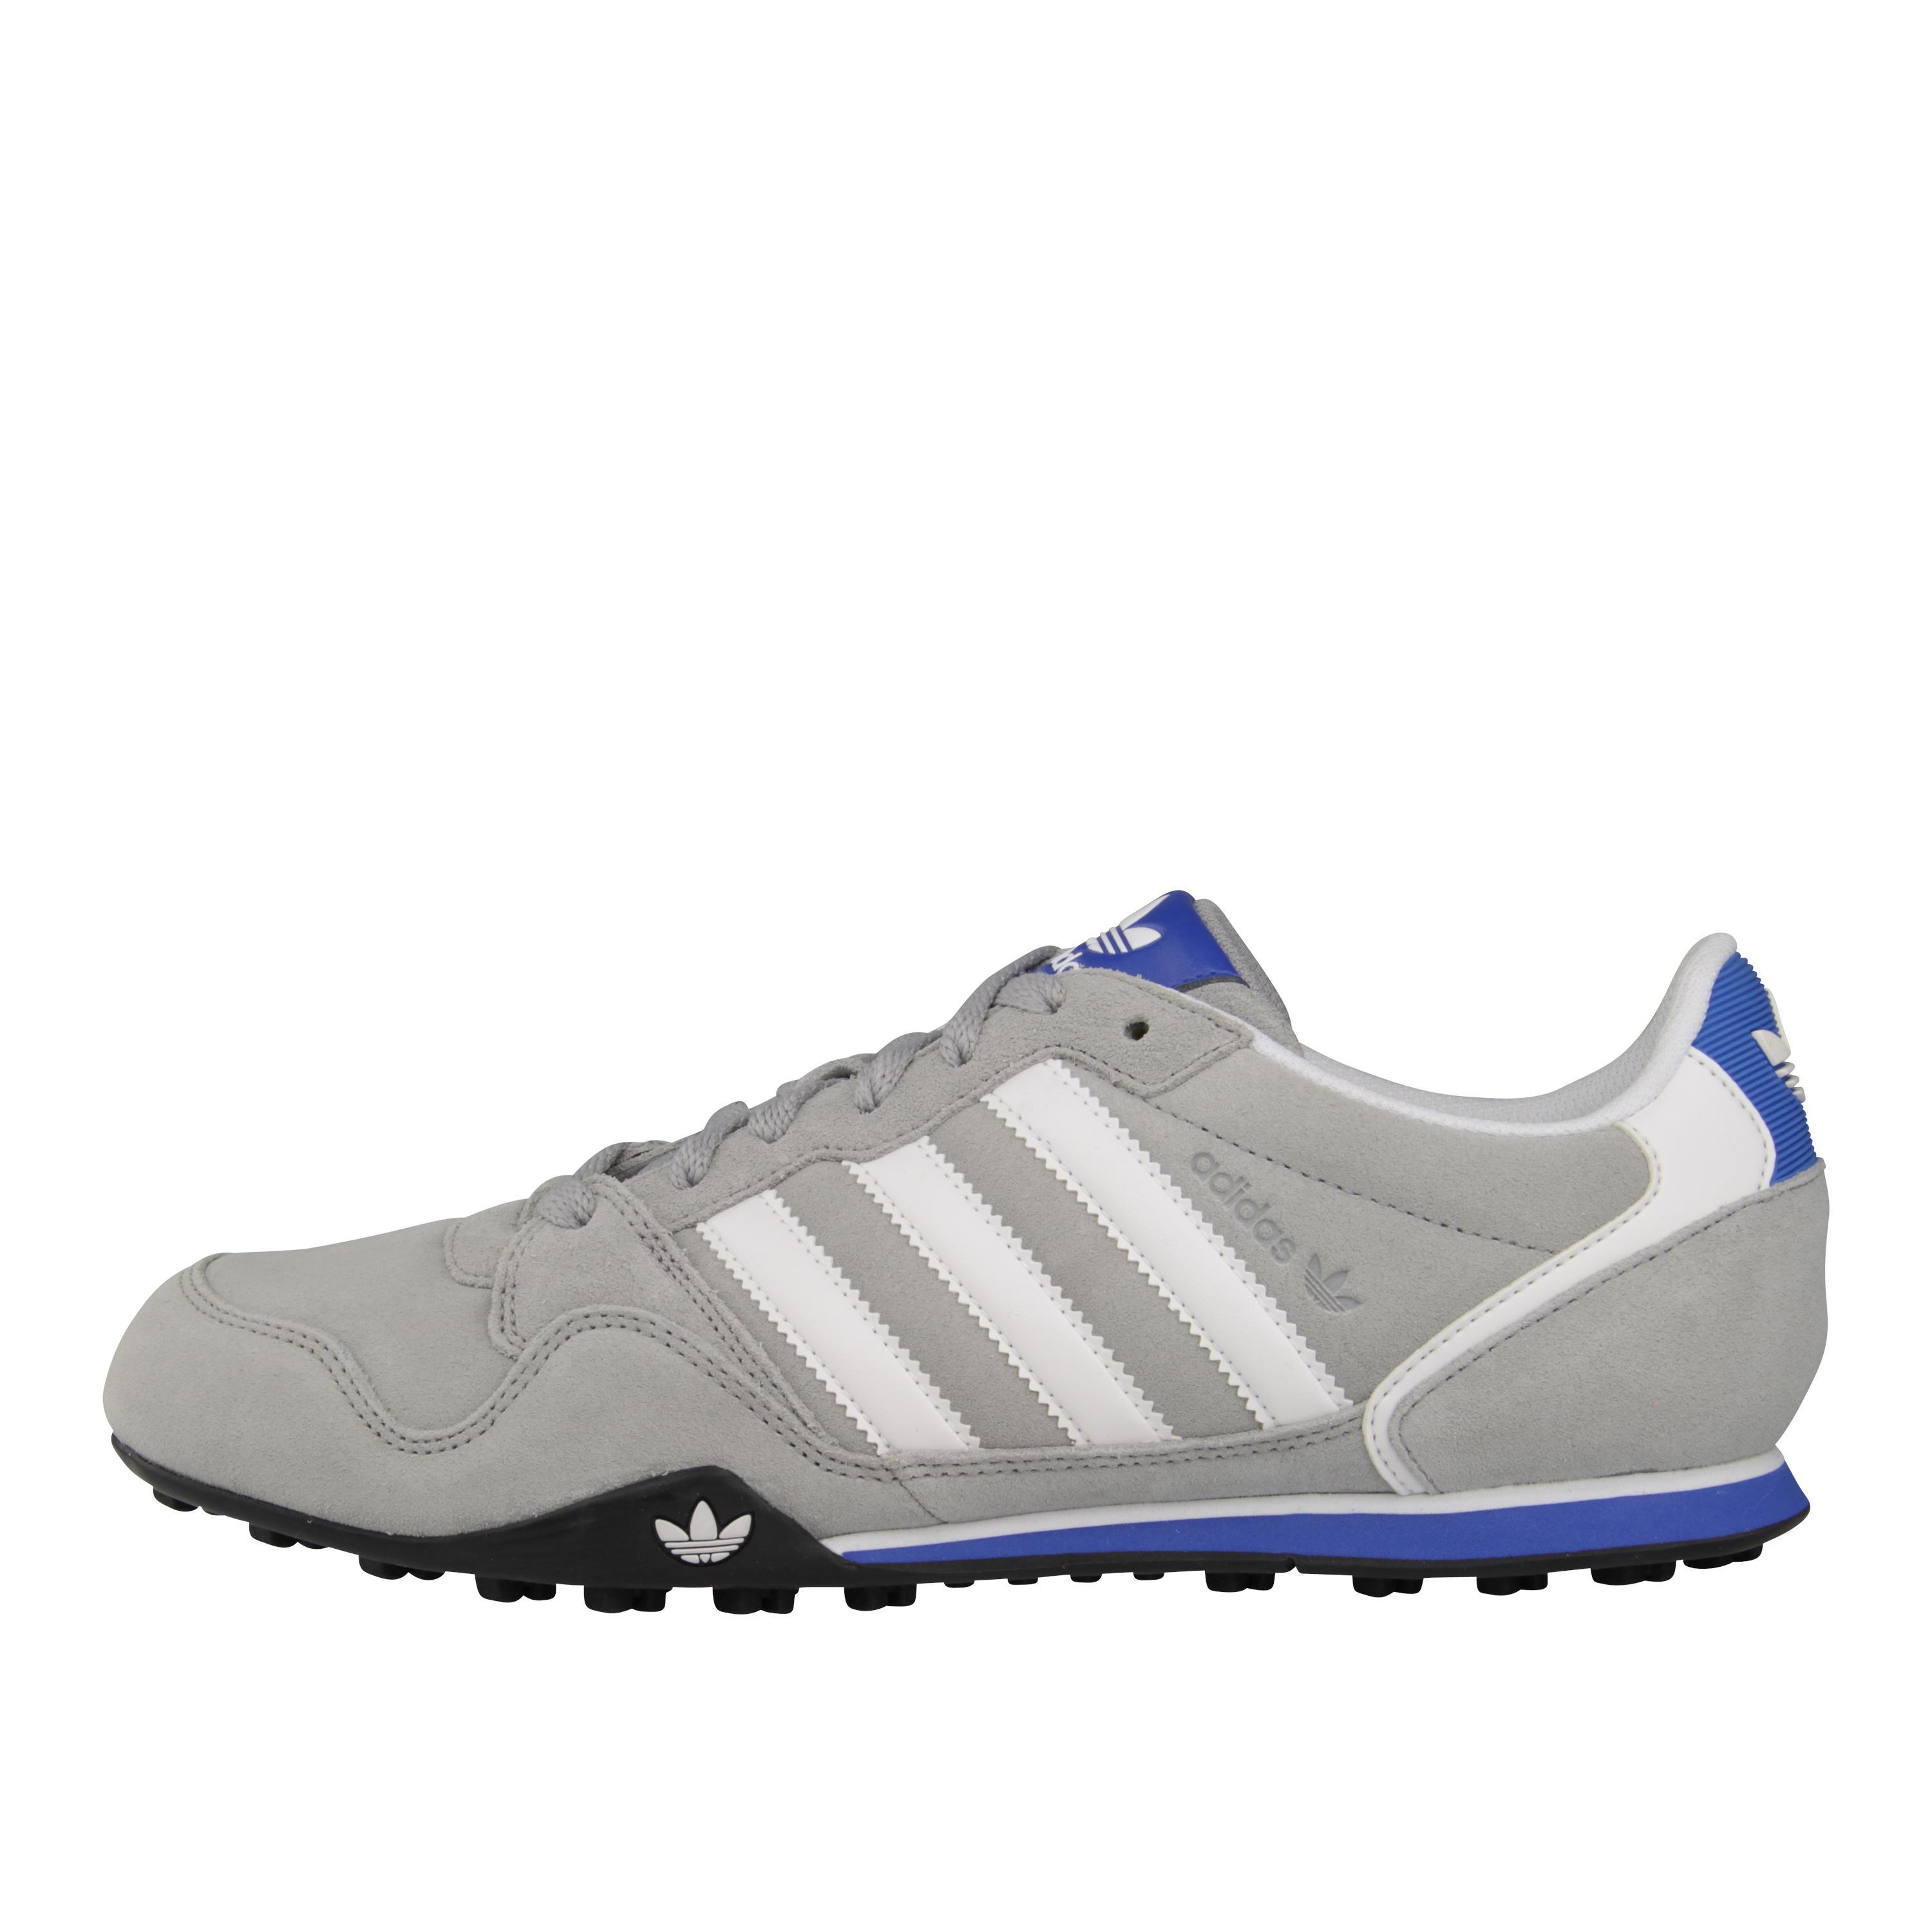 Foto adidas Zx Country 3 foto 270603